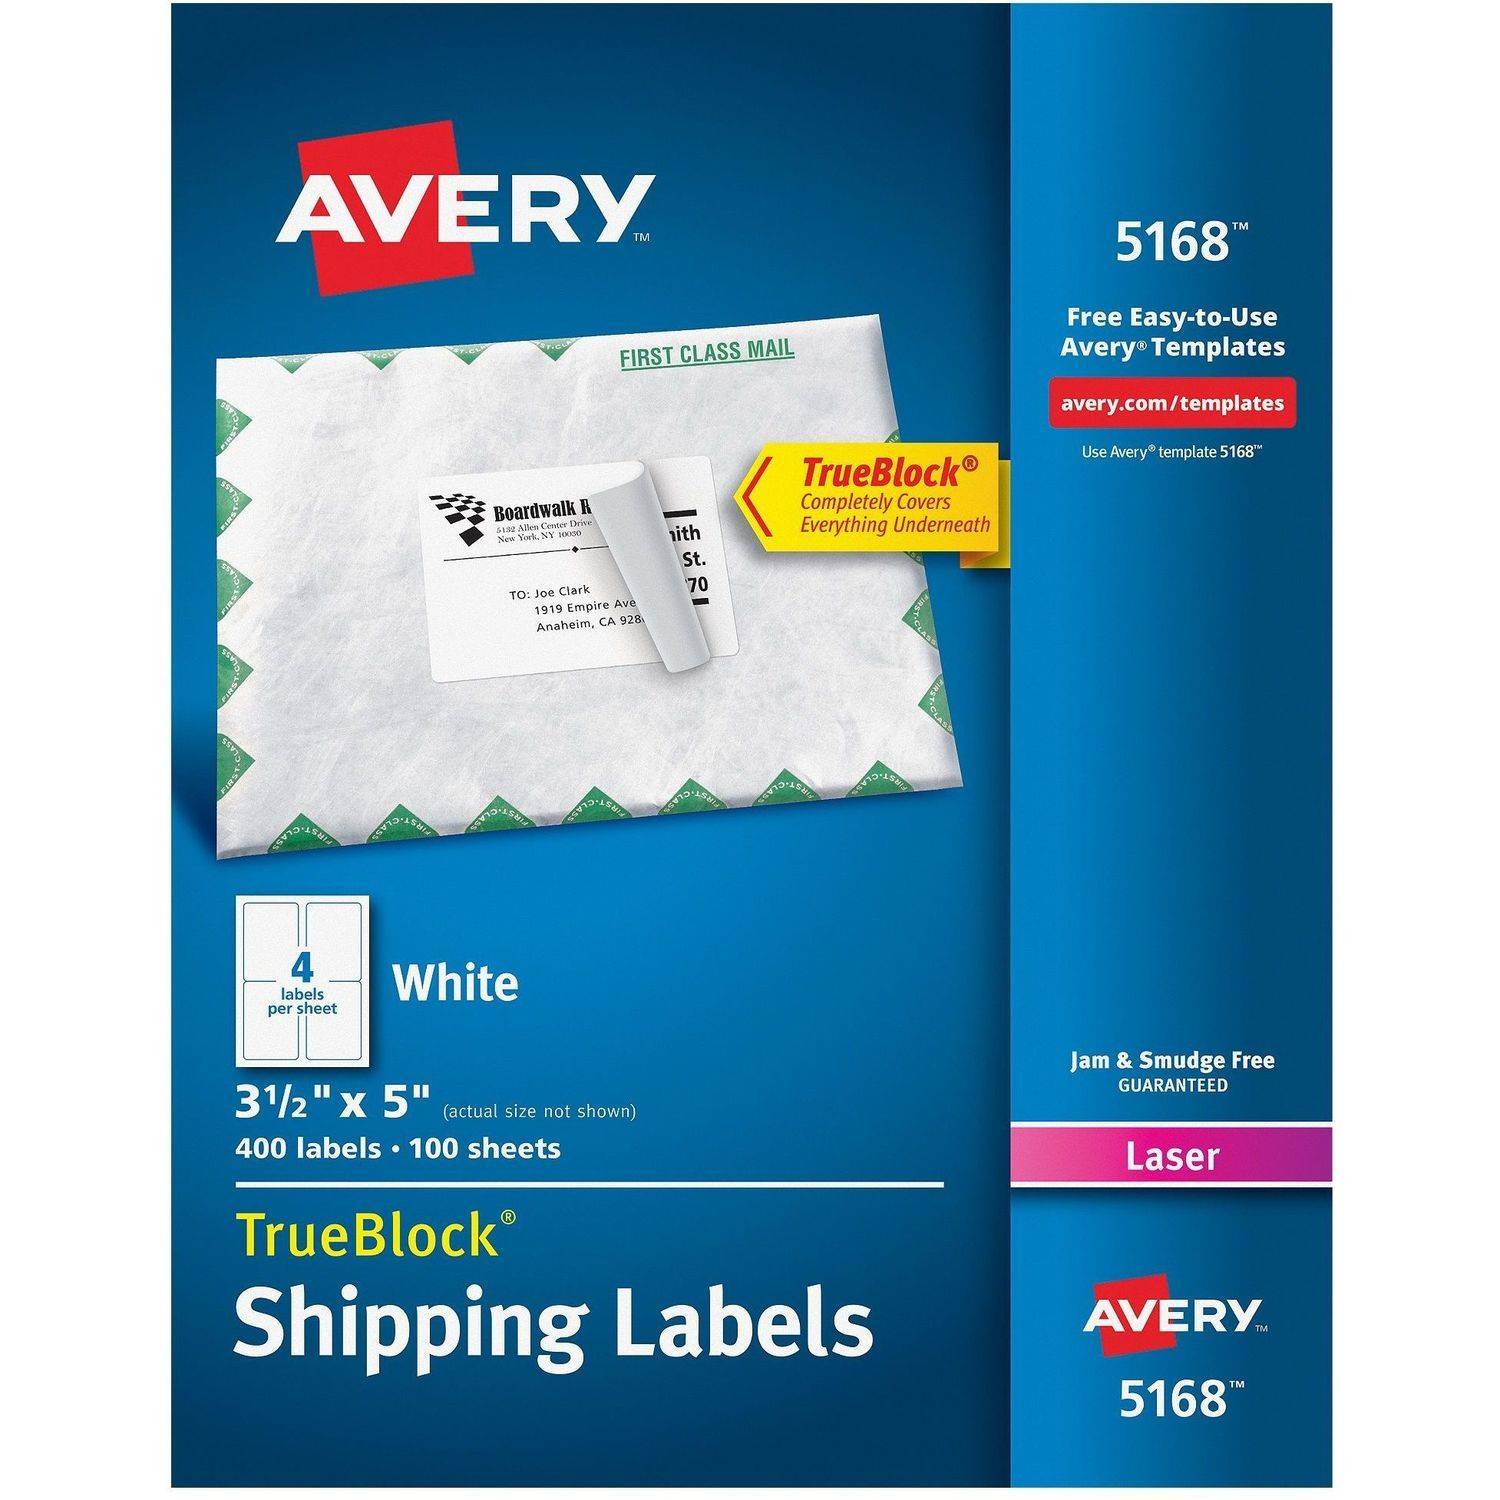 Avery 150pk High-Visibility Laser Labels 5978, Assorted Neon Colors, 2 ...